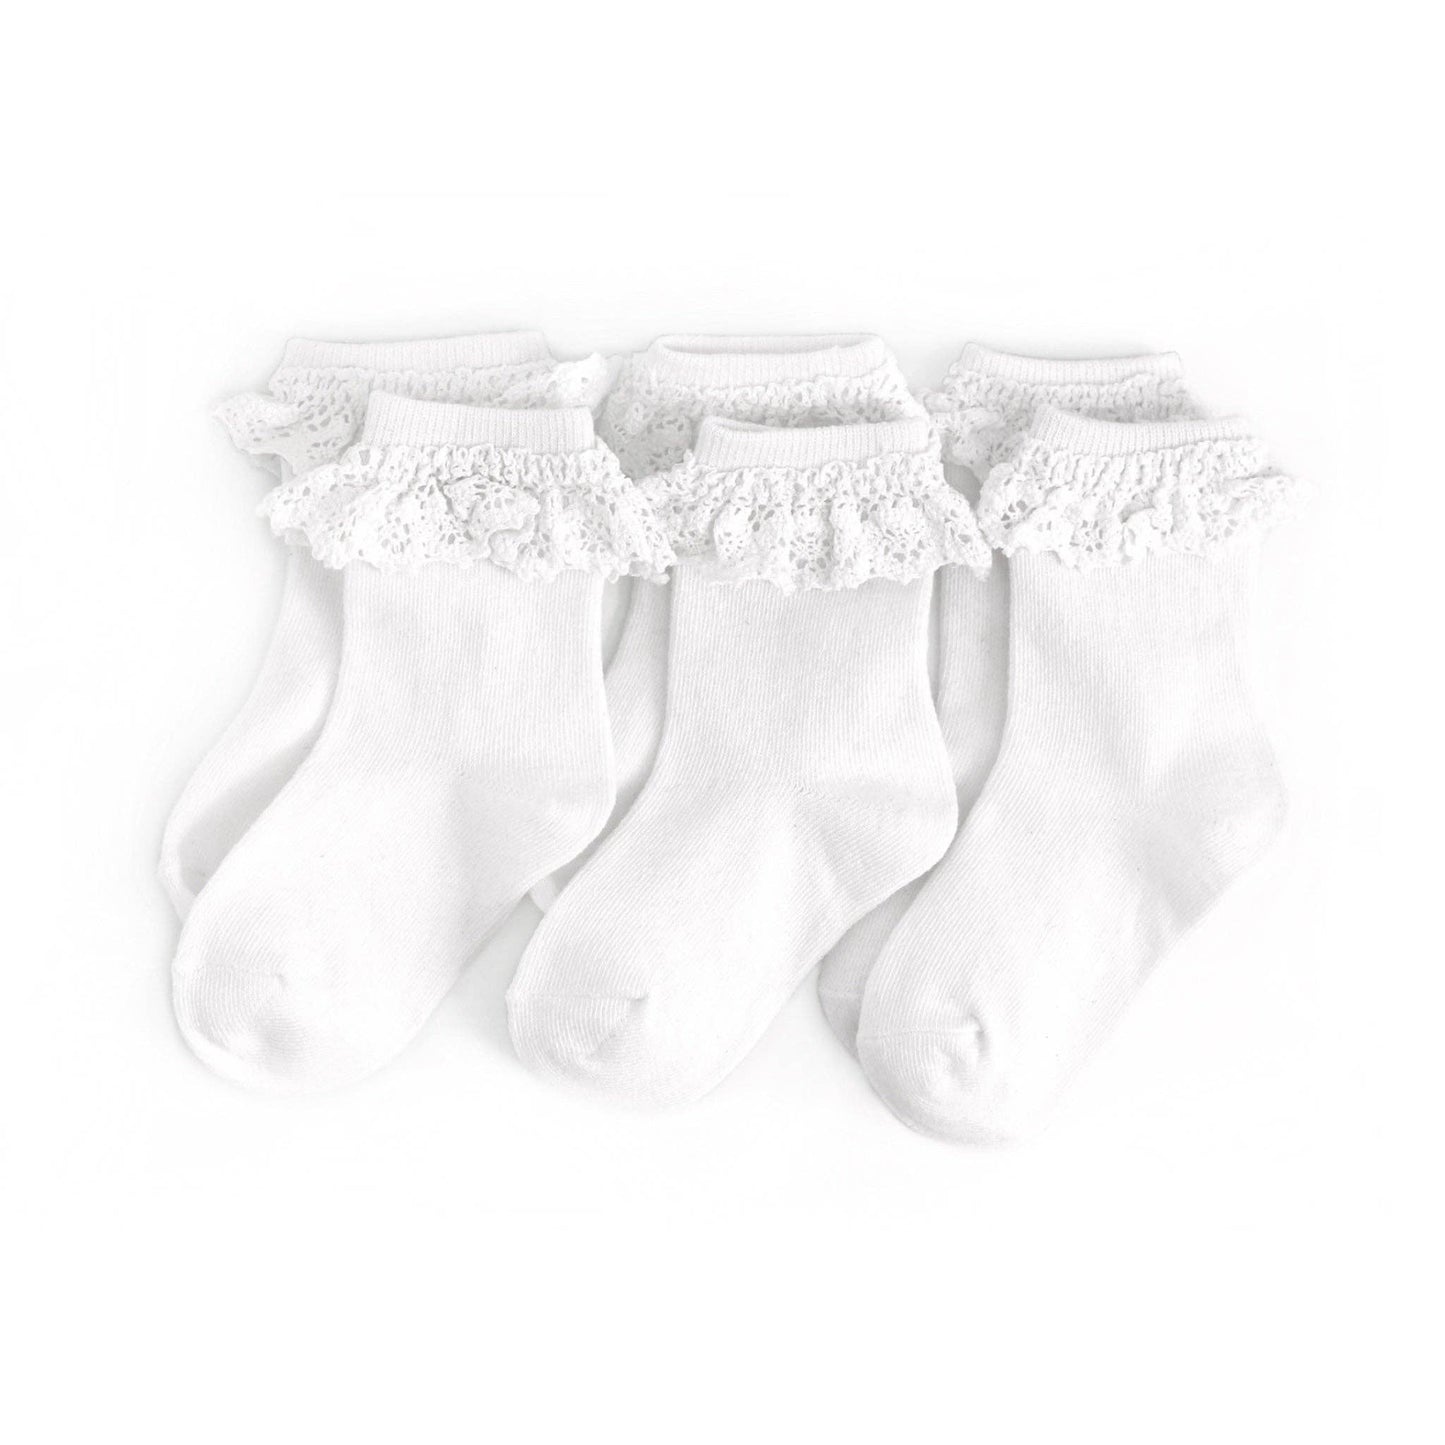 Little Stocking Co. - White Lace Midi Sock 3-Pack: 1.5-3 YEARS